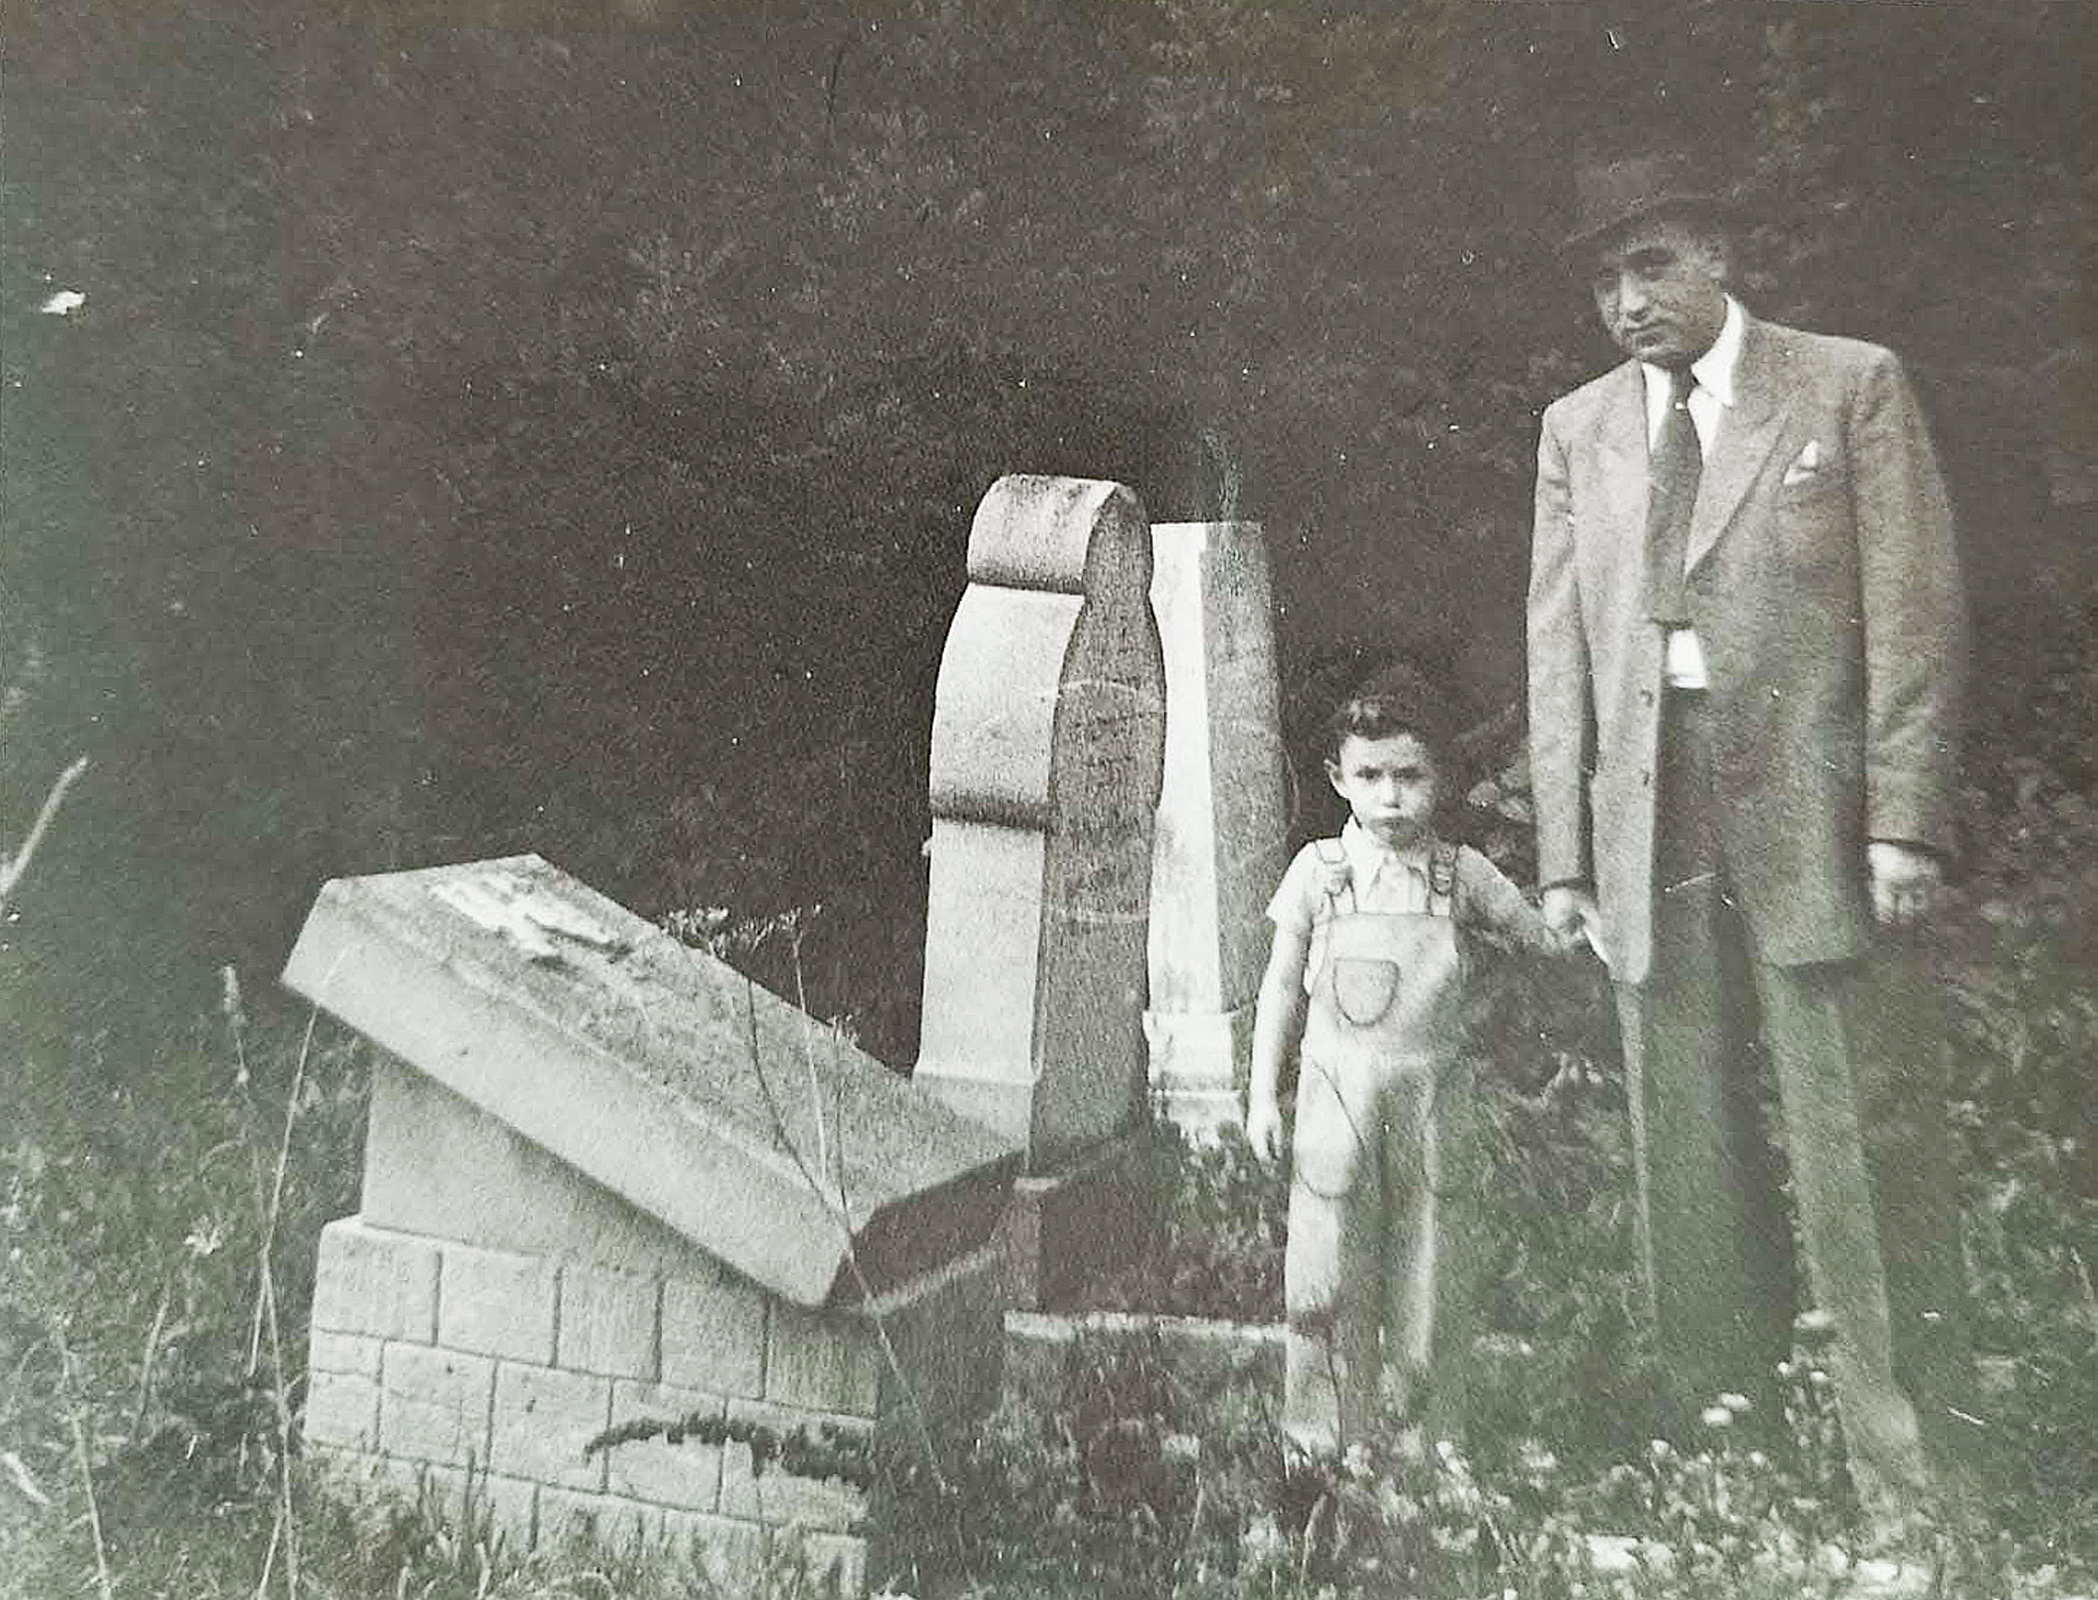 Harry with little Fredy at the cemetery in Baisingen